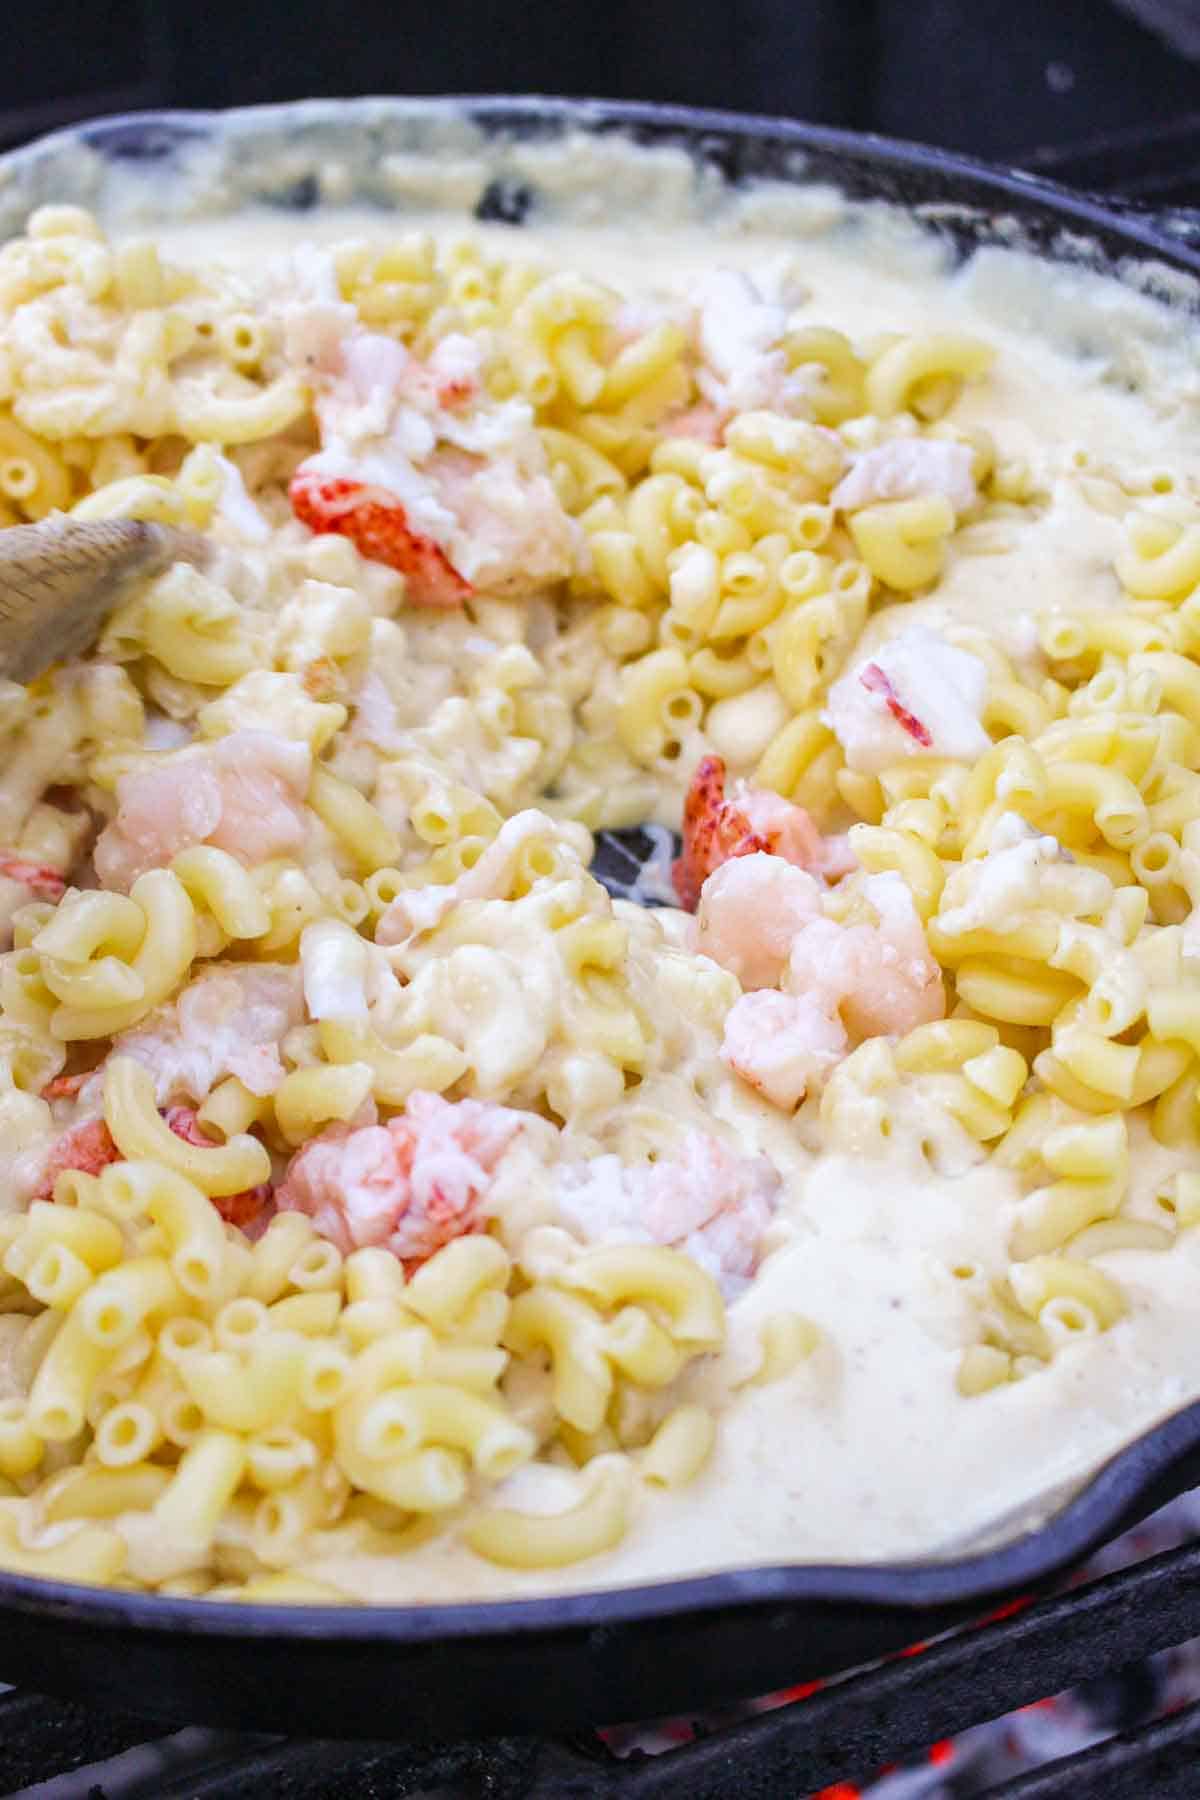 The lobster Mac and cheese getting mixed together.